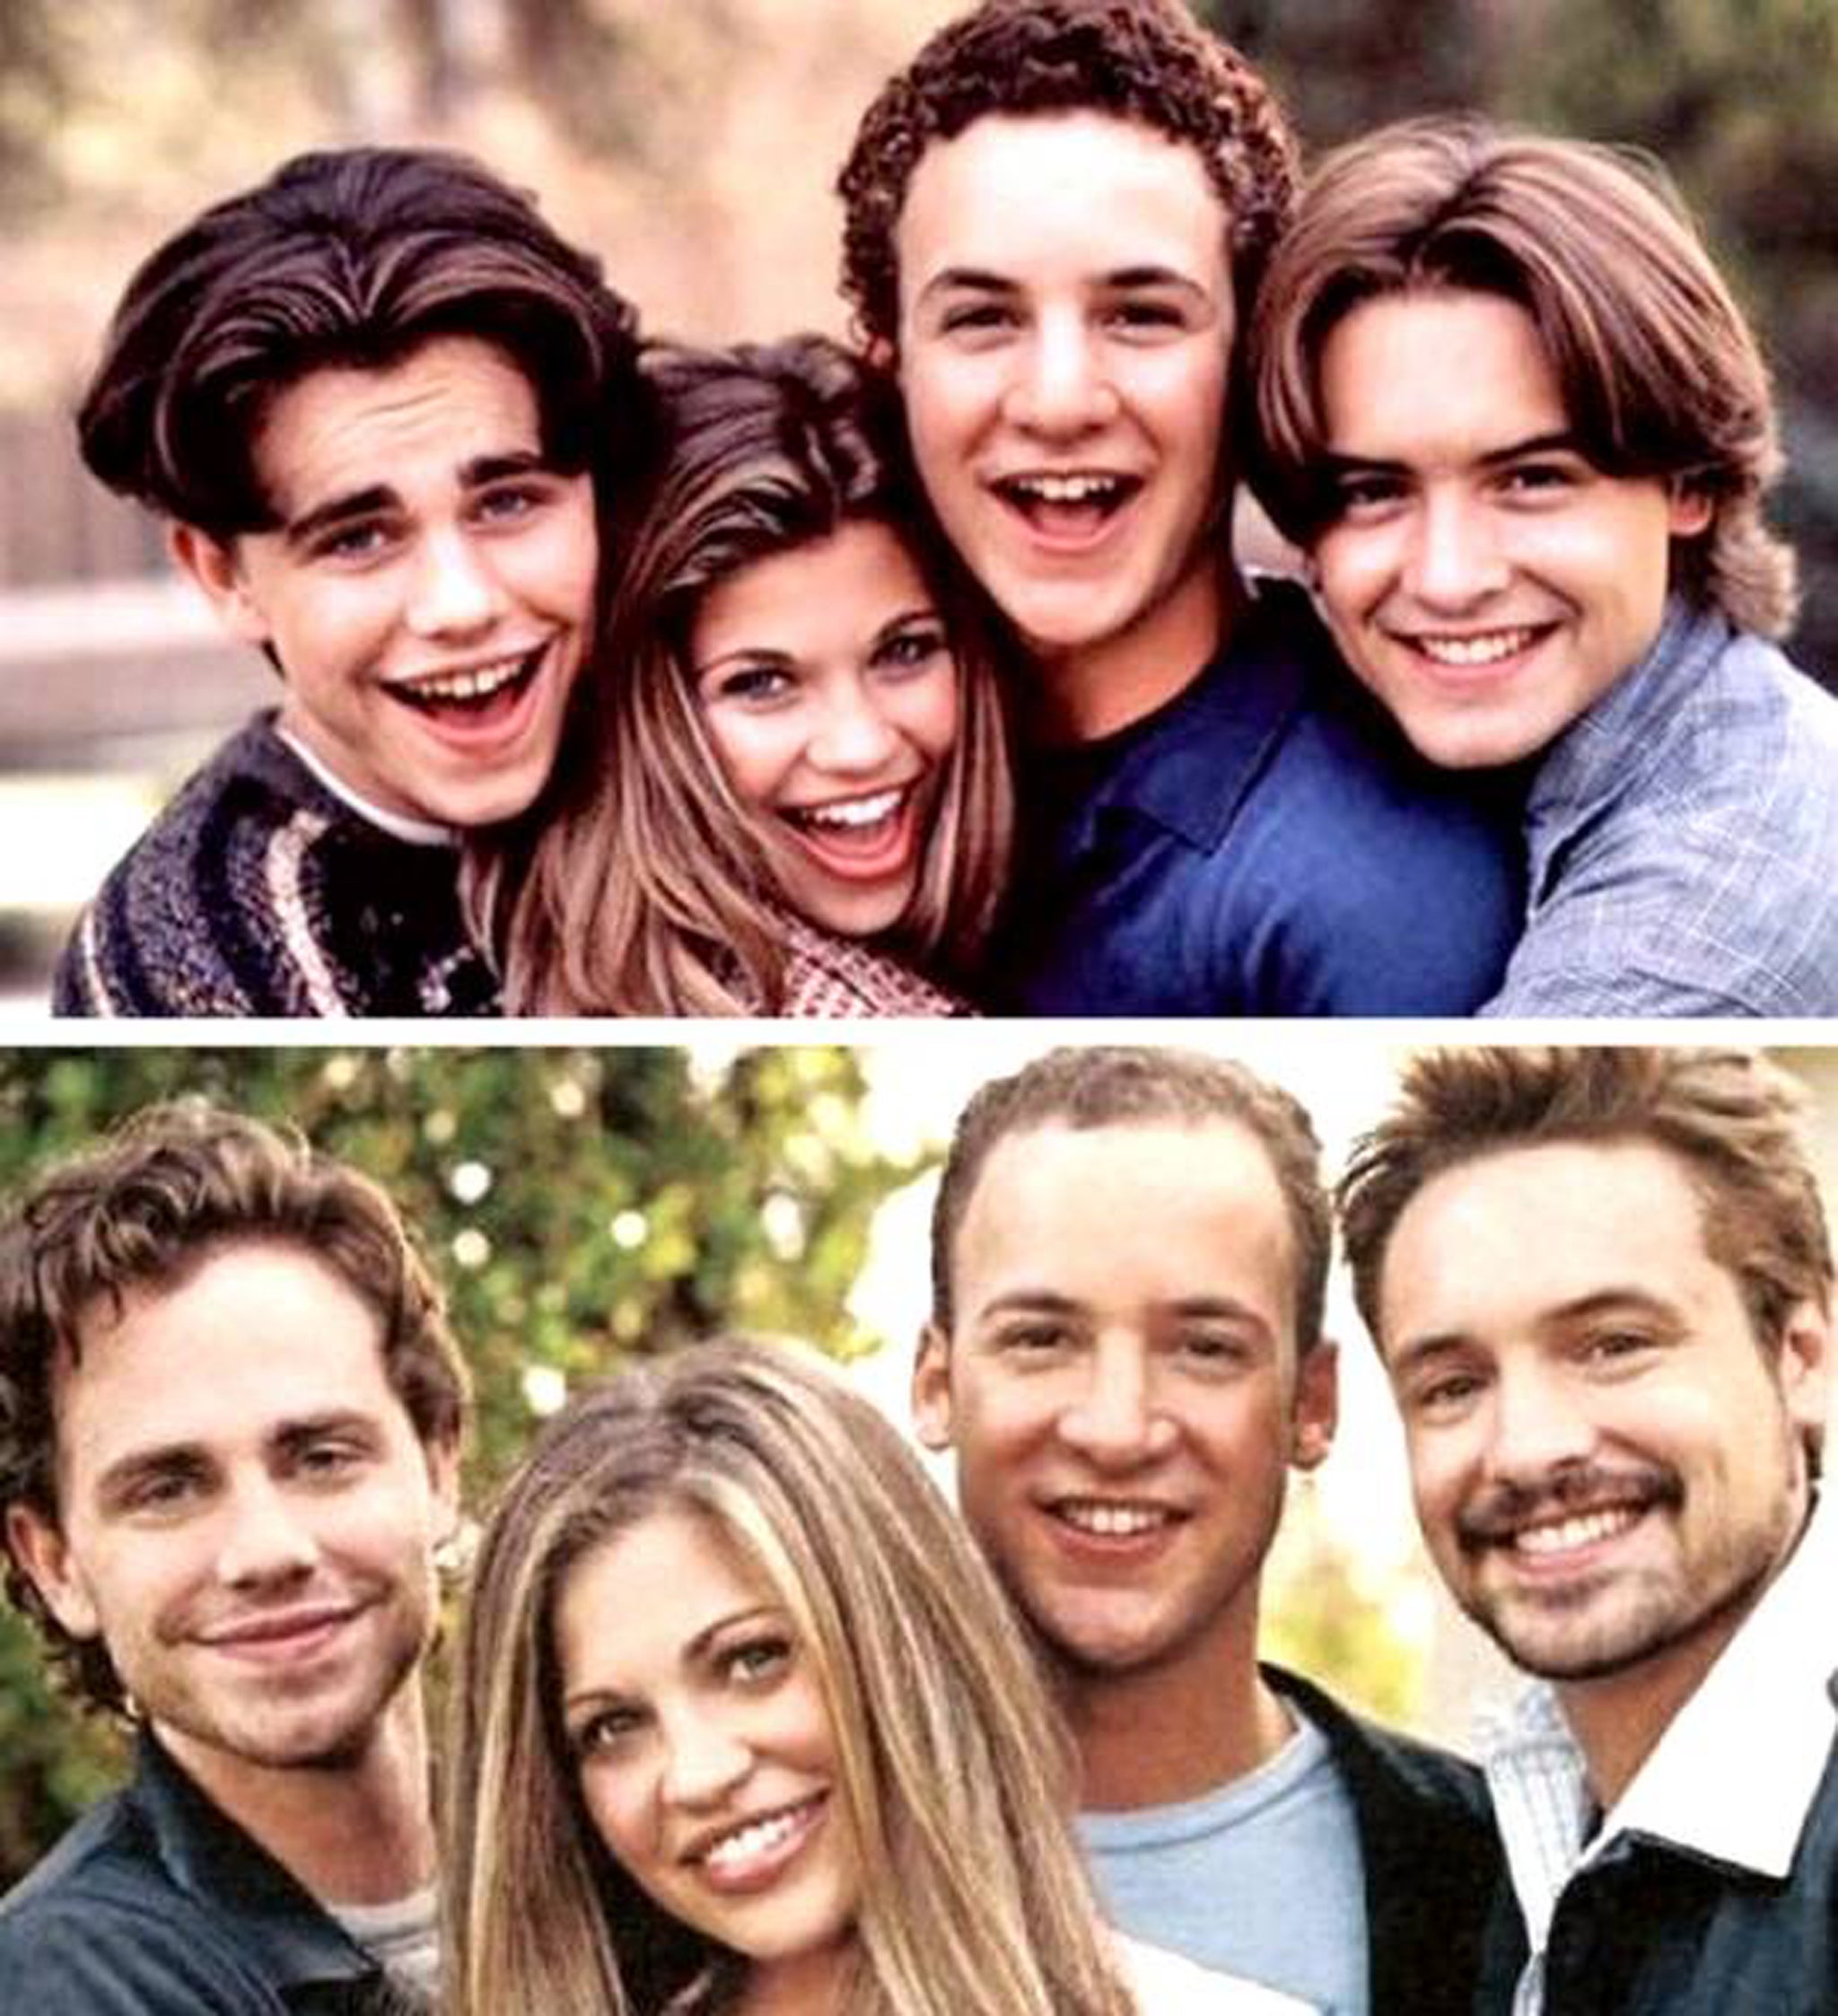 Then and now: (Top) 'Boy Meets World'; (Bottom) 'Girl Meets World'